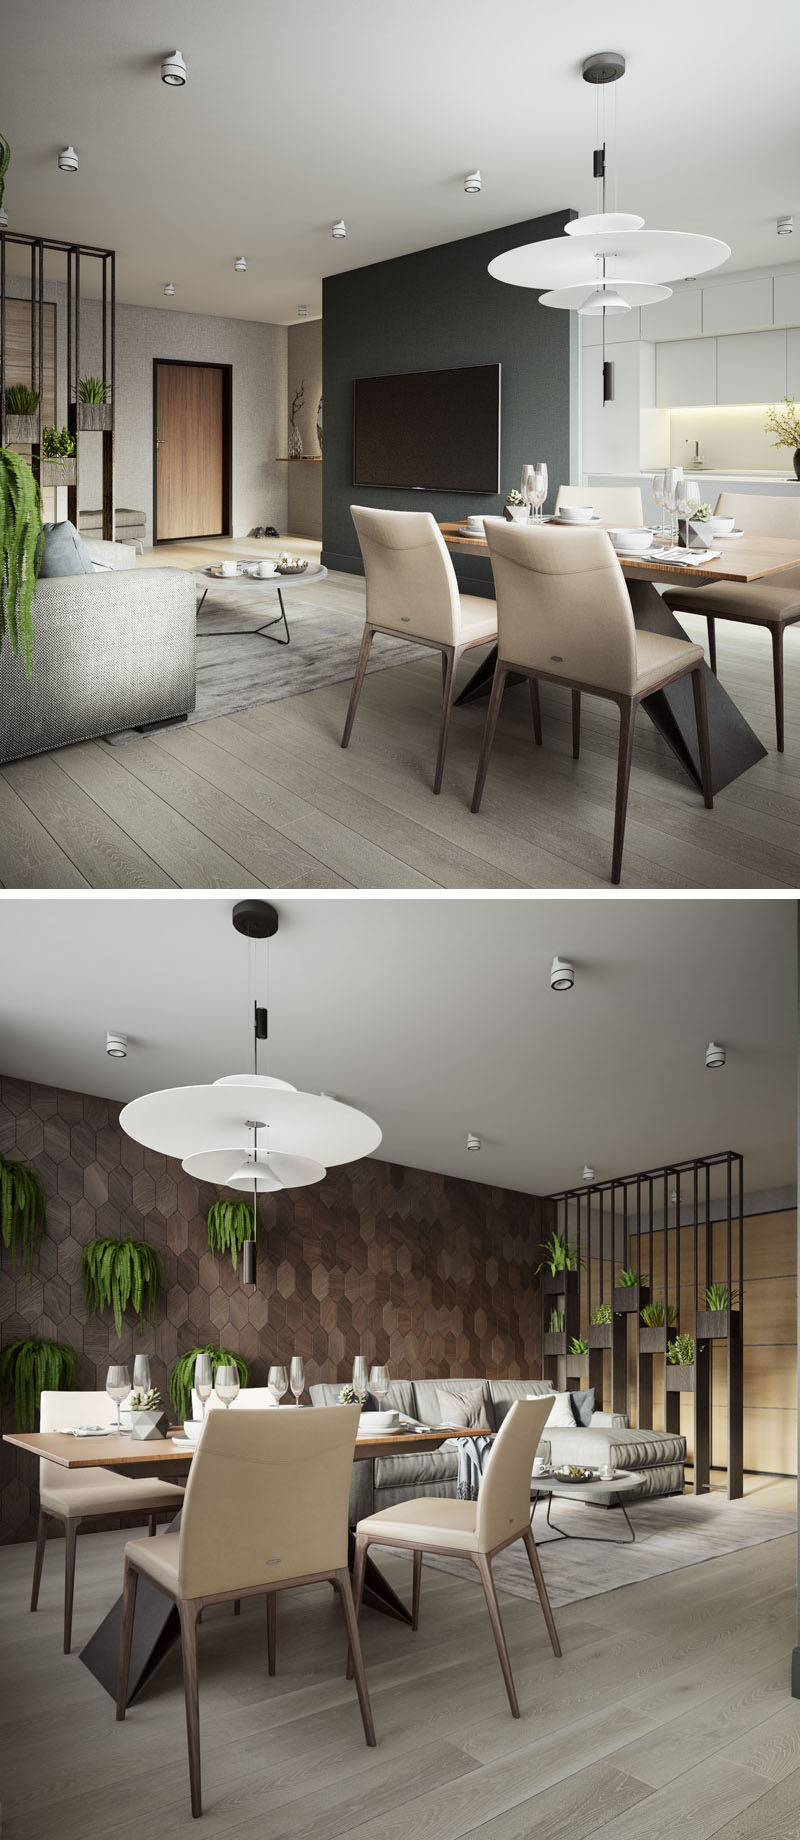 In this modern apartment, a small four person table with an angled base is surrounded by light colored dining chairs, and an artistic pendant light hangs above it. #DiningArea #ModernApartment